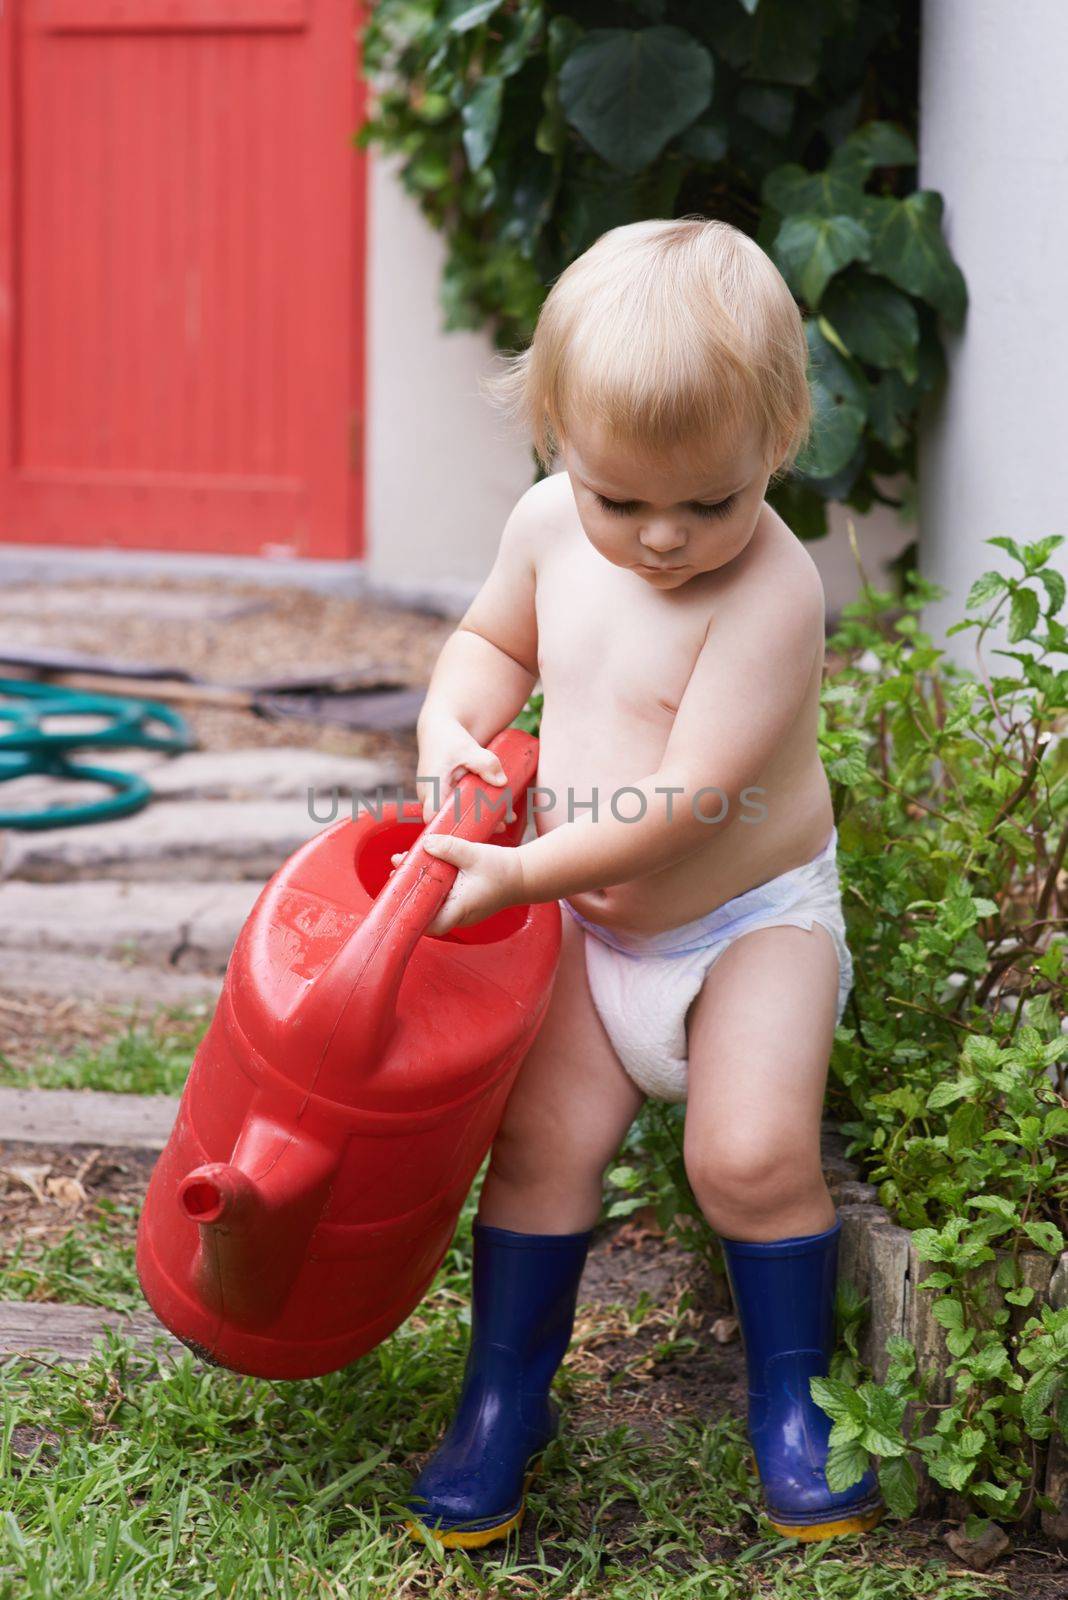 Curious about how nature works. An adorable baby boy watering the garden